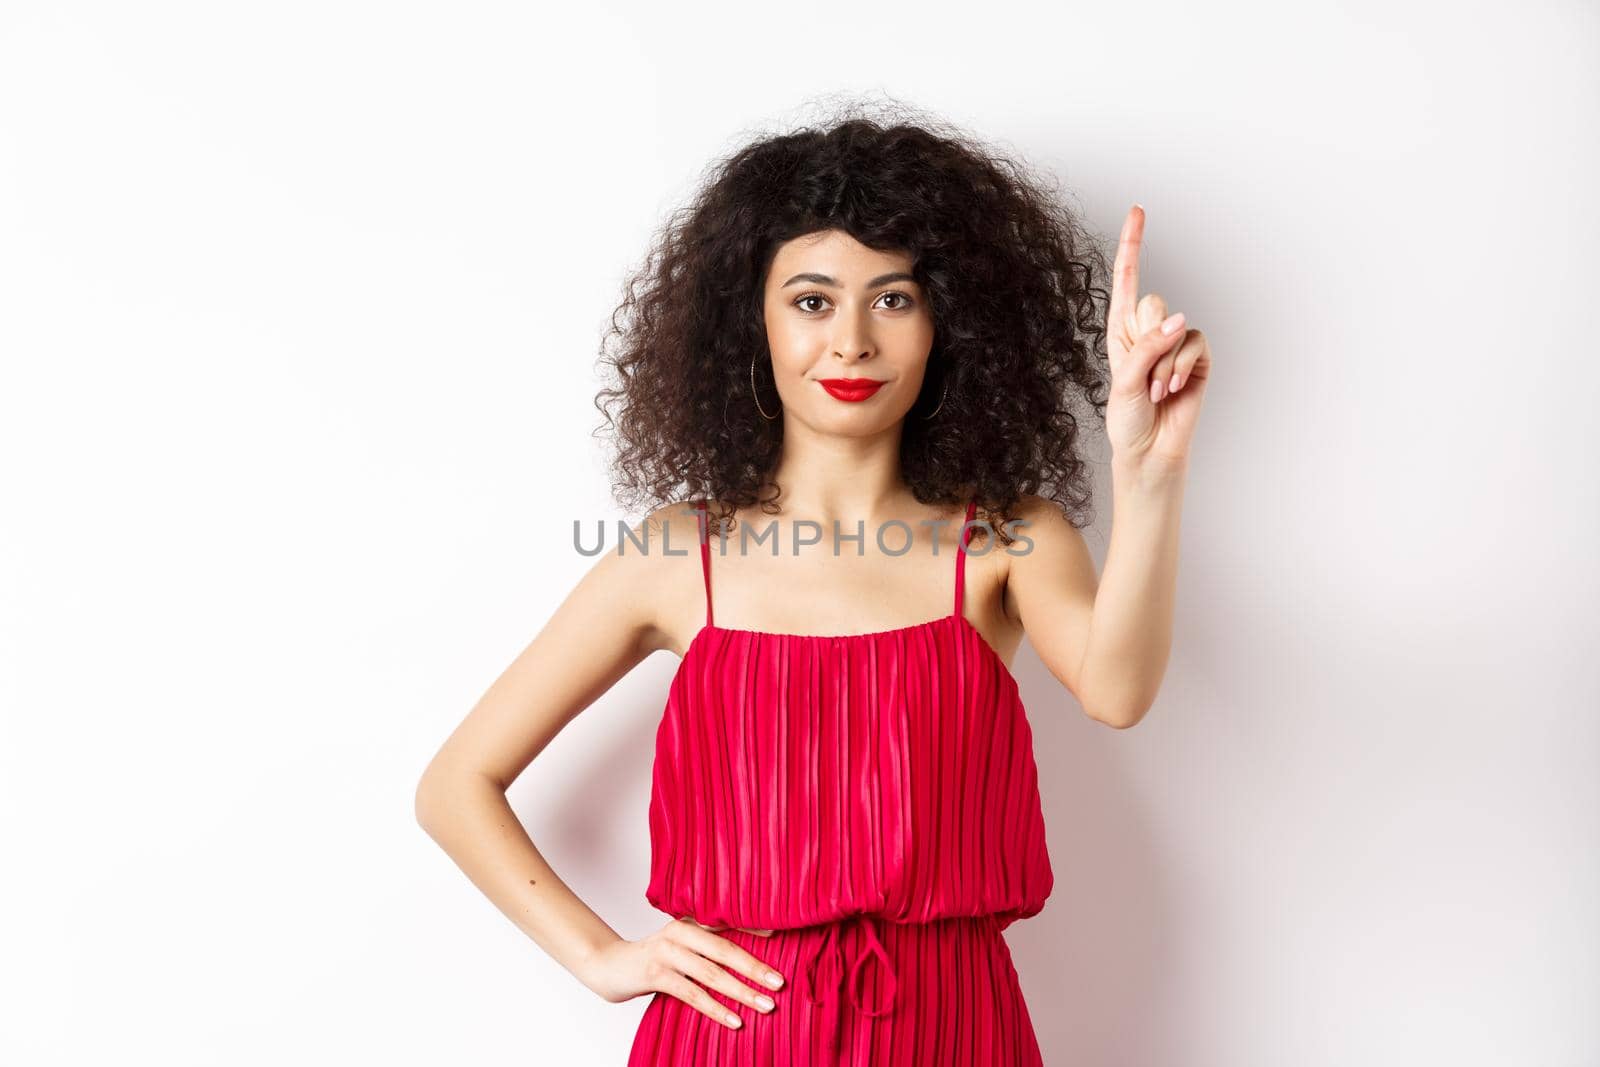 Smiling caucasian woman with curly hair, wearing red dress, showing rule number one gesture, raising finger and looking confident at camera, white background.